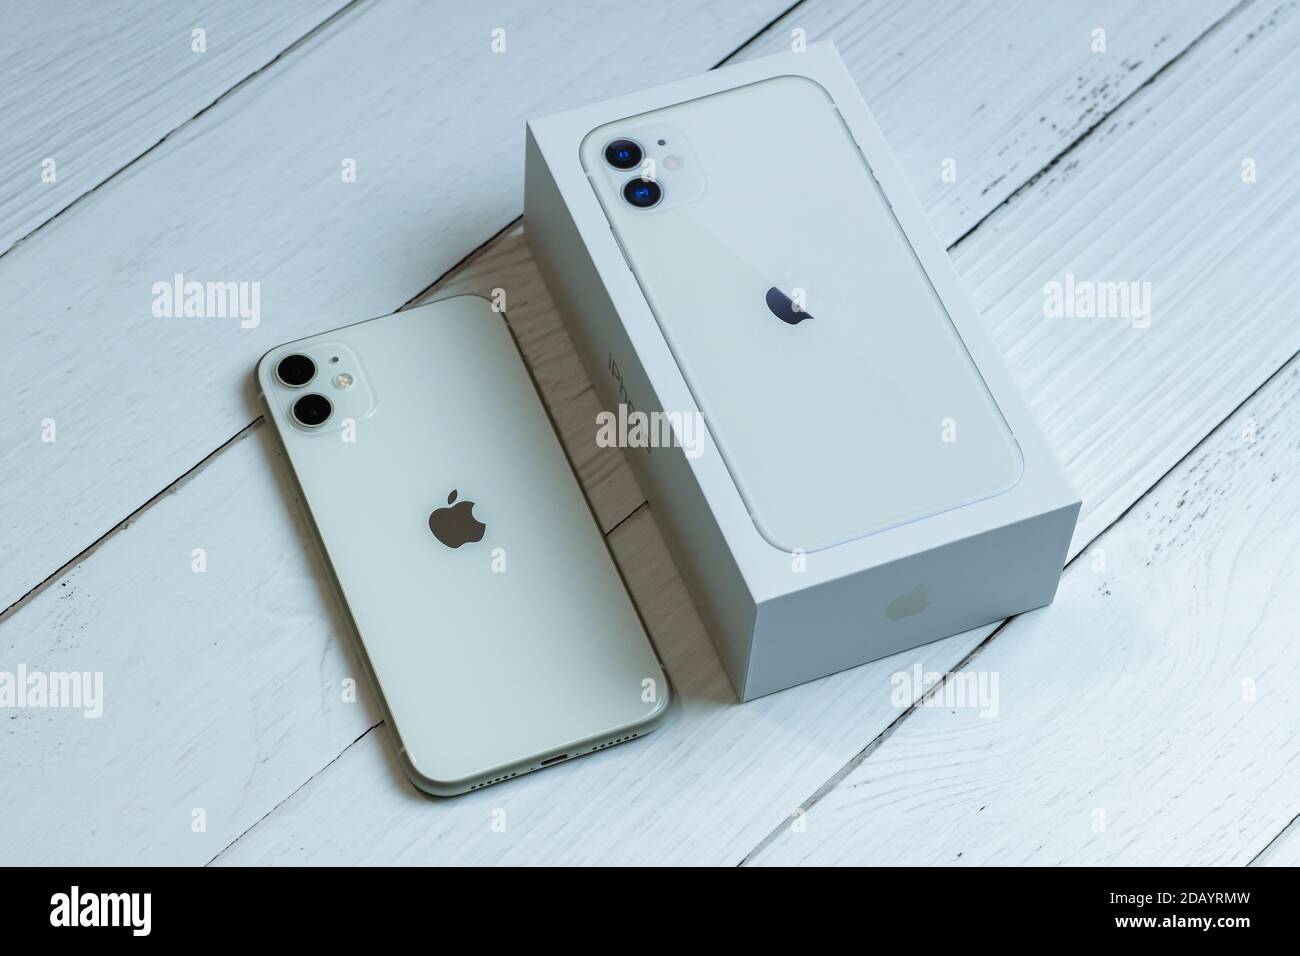 iPhone 11 in white next to its box Stock Photo - Alamy